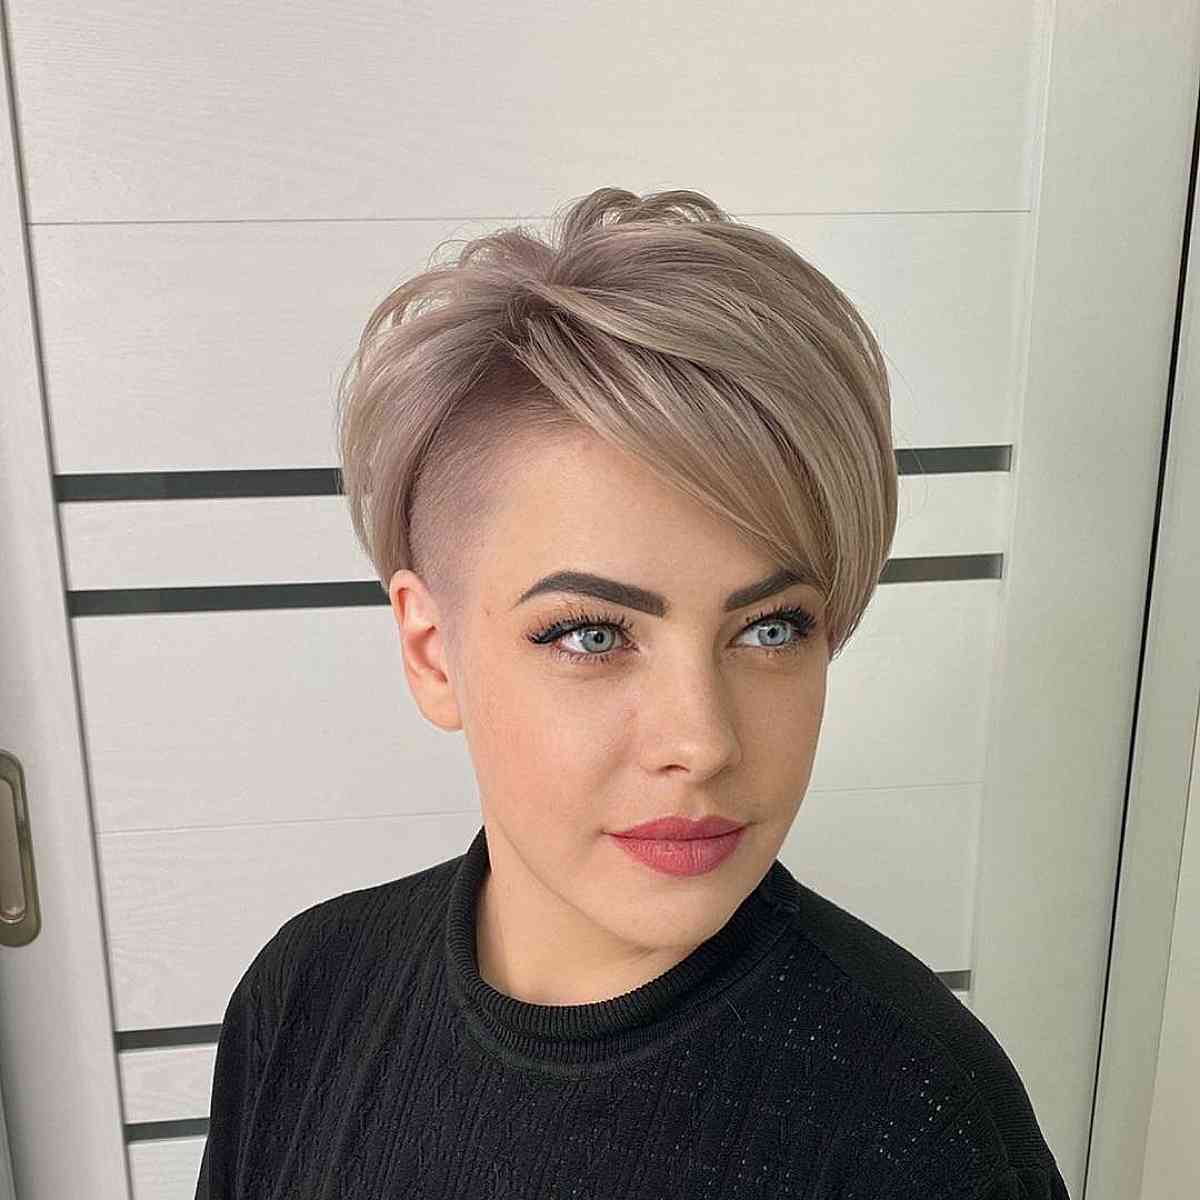 Edgy Shaved Pixie with Side Bangs and Stacked Layers